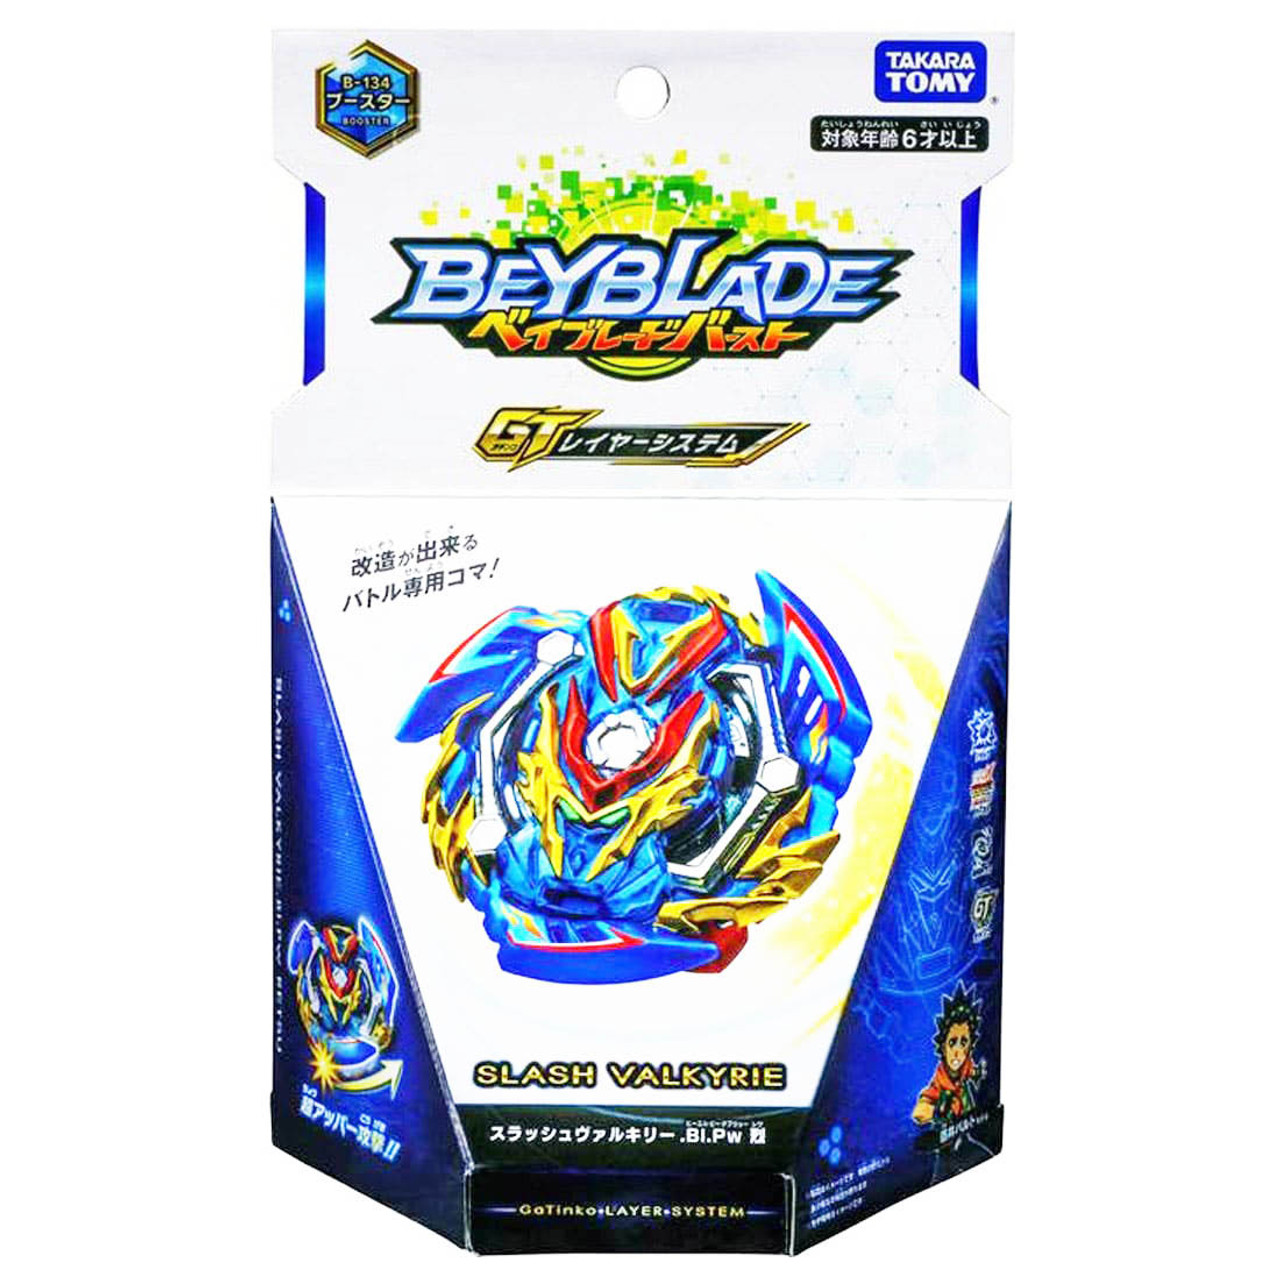 Buy Trending Wholesale beyblade original For Low Prices Now